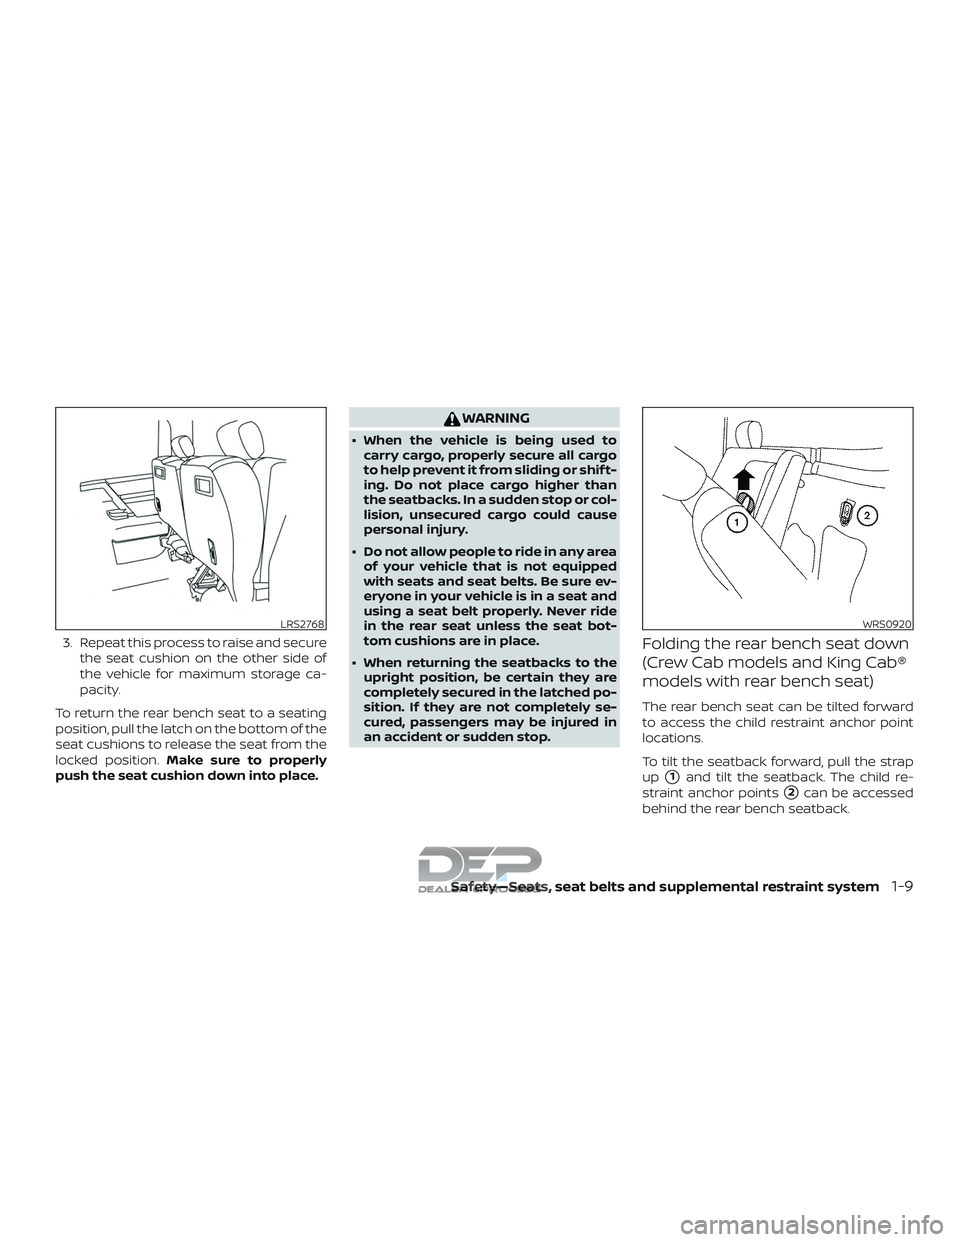 NISSAN TITAN 2018  Owner´s Manual 3. Repeat this process to raise and securethe seat cushion on the other side of
the vehicle for maximum storage ca-
pacity.
To return the rear bench seat to a seating
position, pull the latch on the b